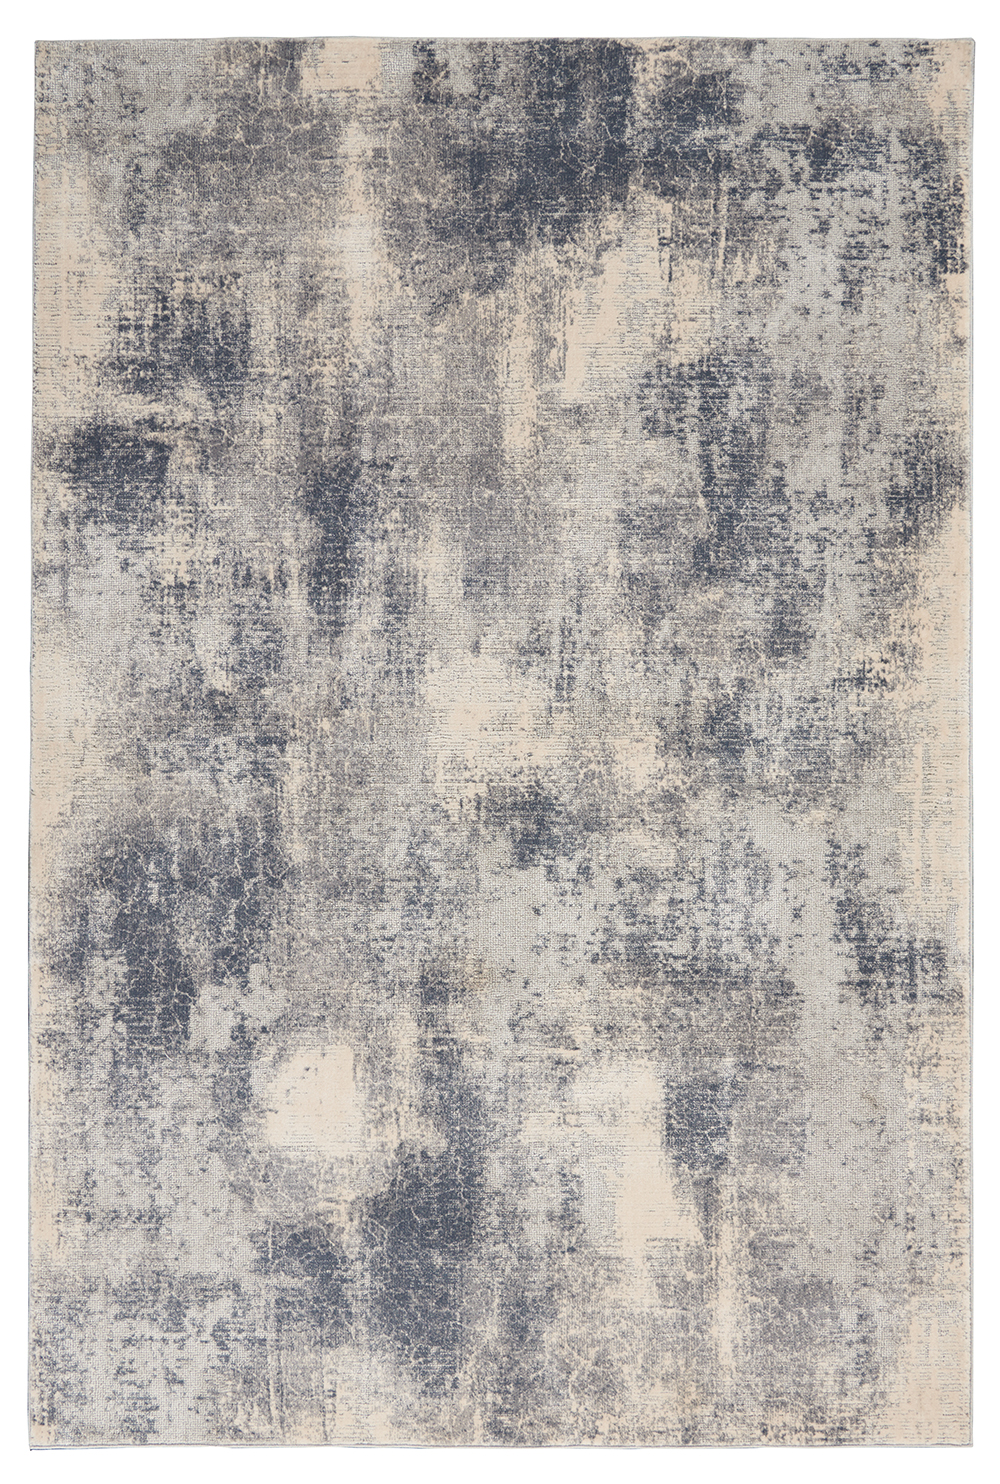 Nourison Rugs - Rustic Textures Rectanglular RUS02 Rug in Blue / Ivory - 1.8m x 1.2m